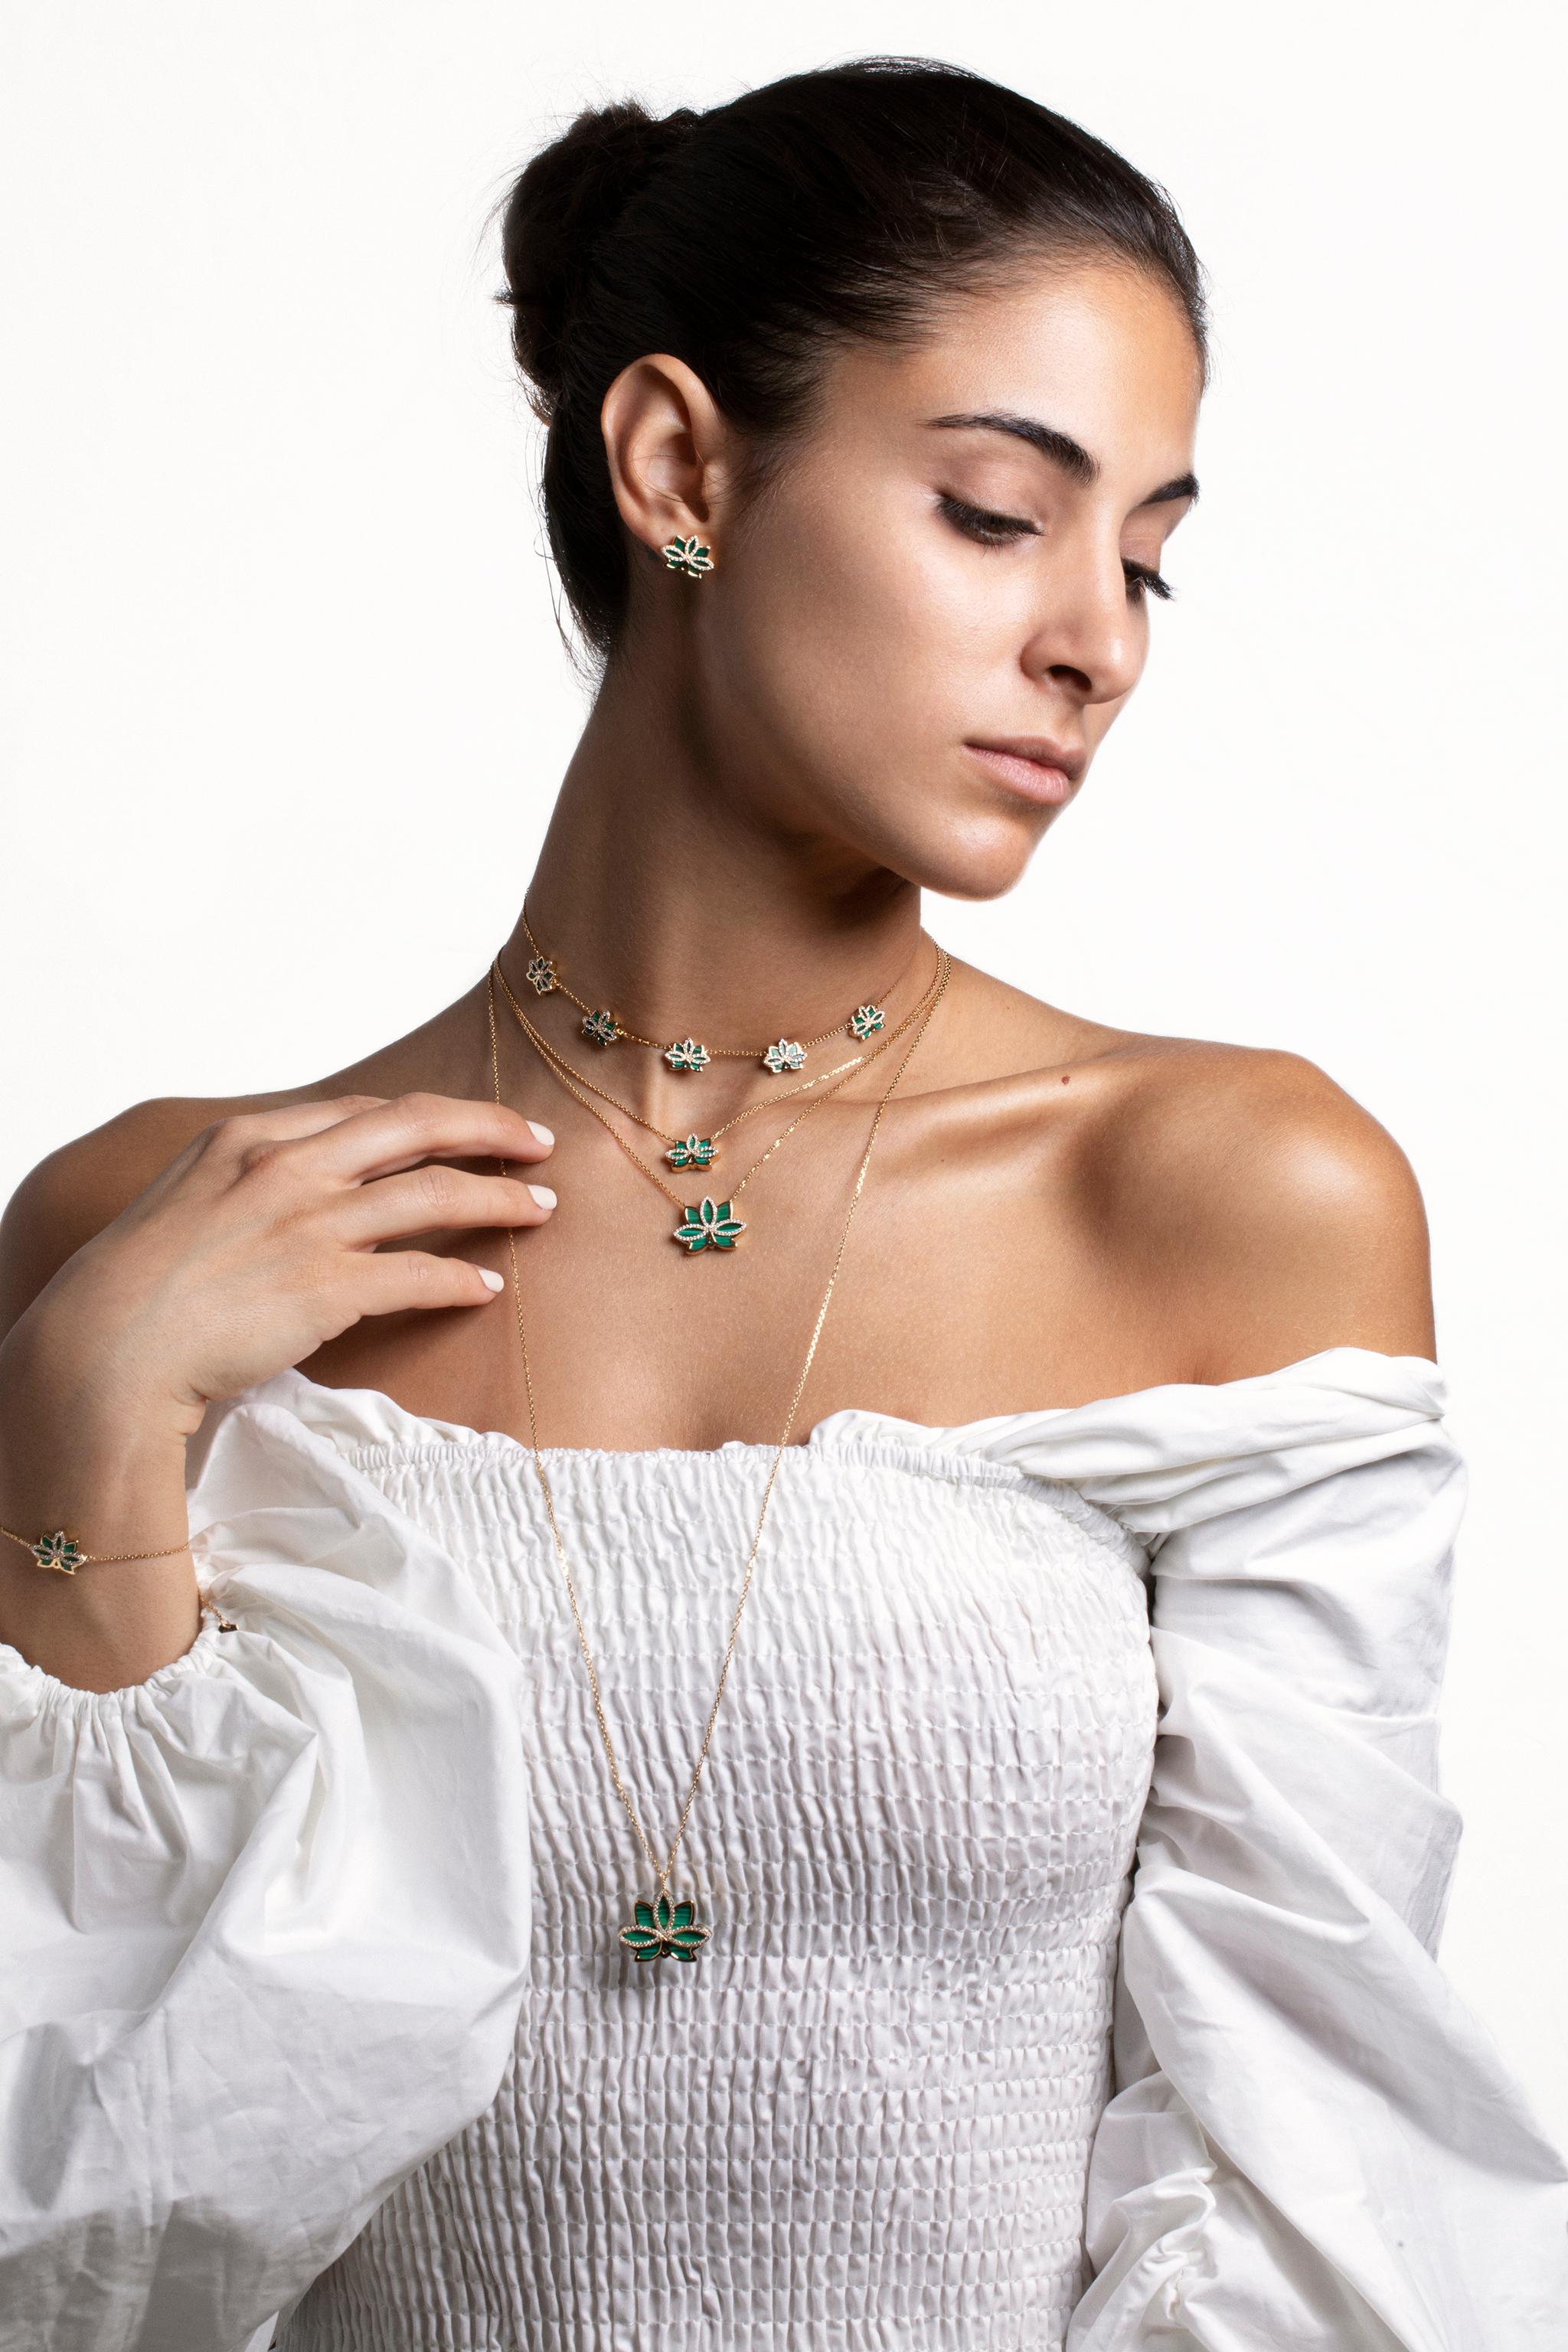 Show your sensitive and daring side with this beautiful Malachite choker. You’ll fall head over heels for the feminine, dainty chain that only hugs the neck with brilliant baubles to top it off.

Made from 18k gold, diamonds and Malachite.